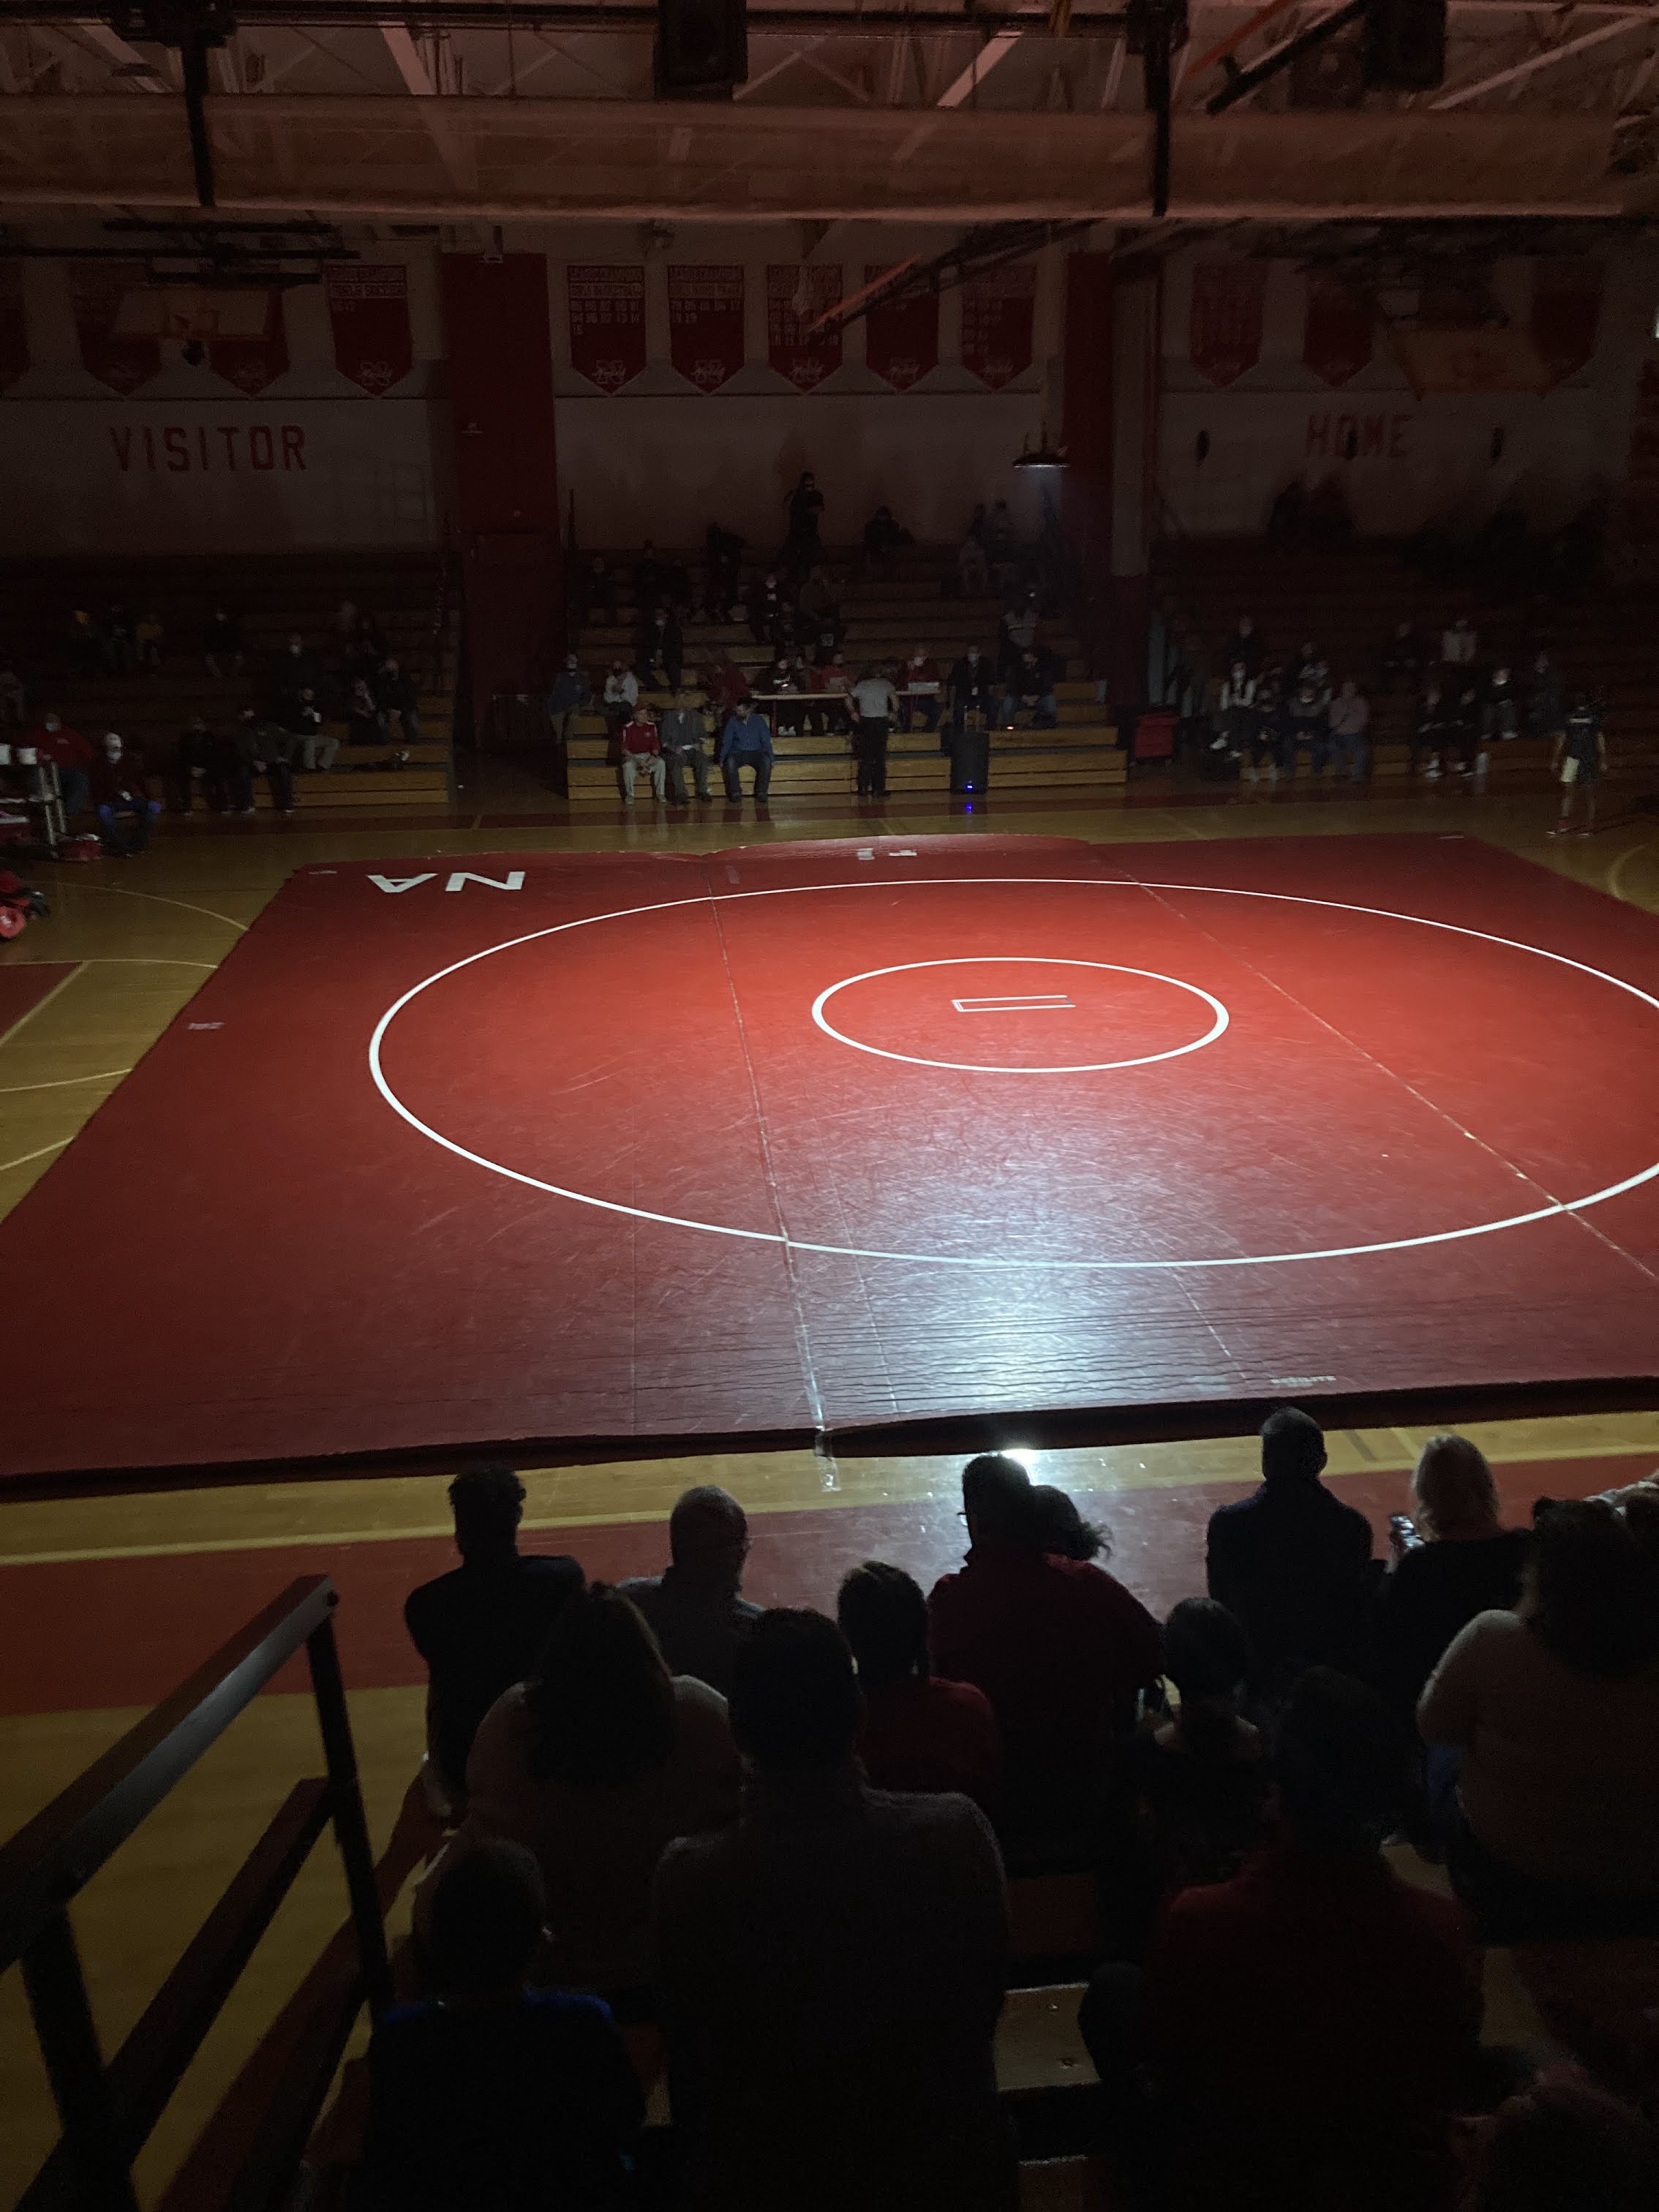 A wrestling mat is illuminated under a spotlight in a dimly lit gymnasium. Spectators are seated in the bleachers around the mat, with some sections of the bleachers marked as 'Visitor' and 'Home.' The red mat stands out against the darkened background, and a few people are standing near the edges of the mat.